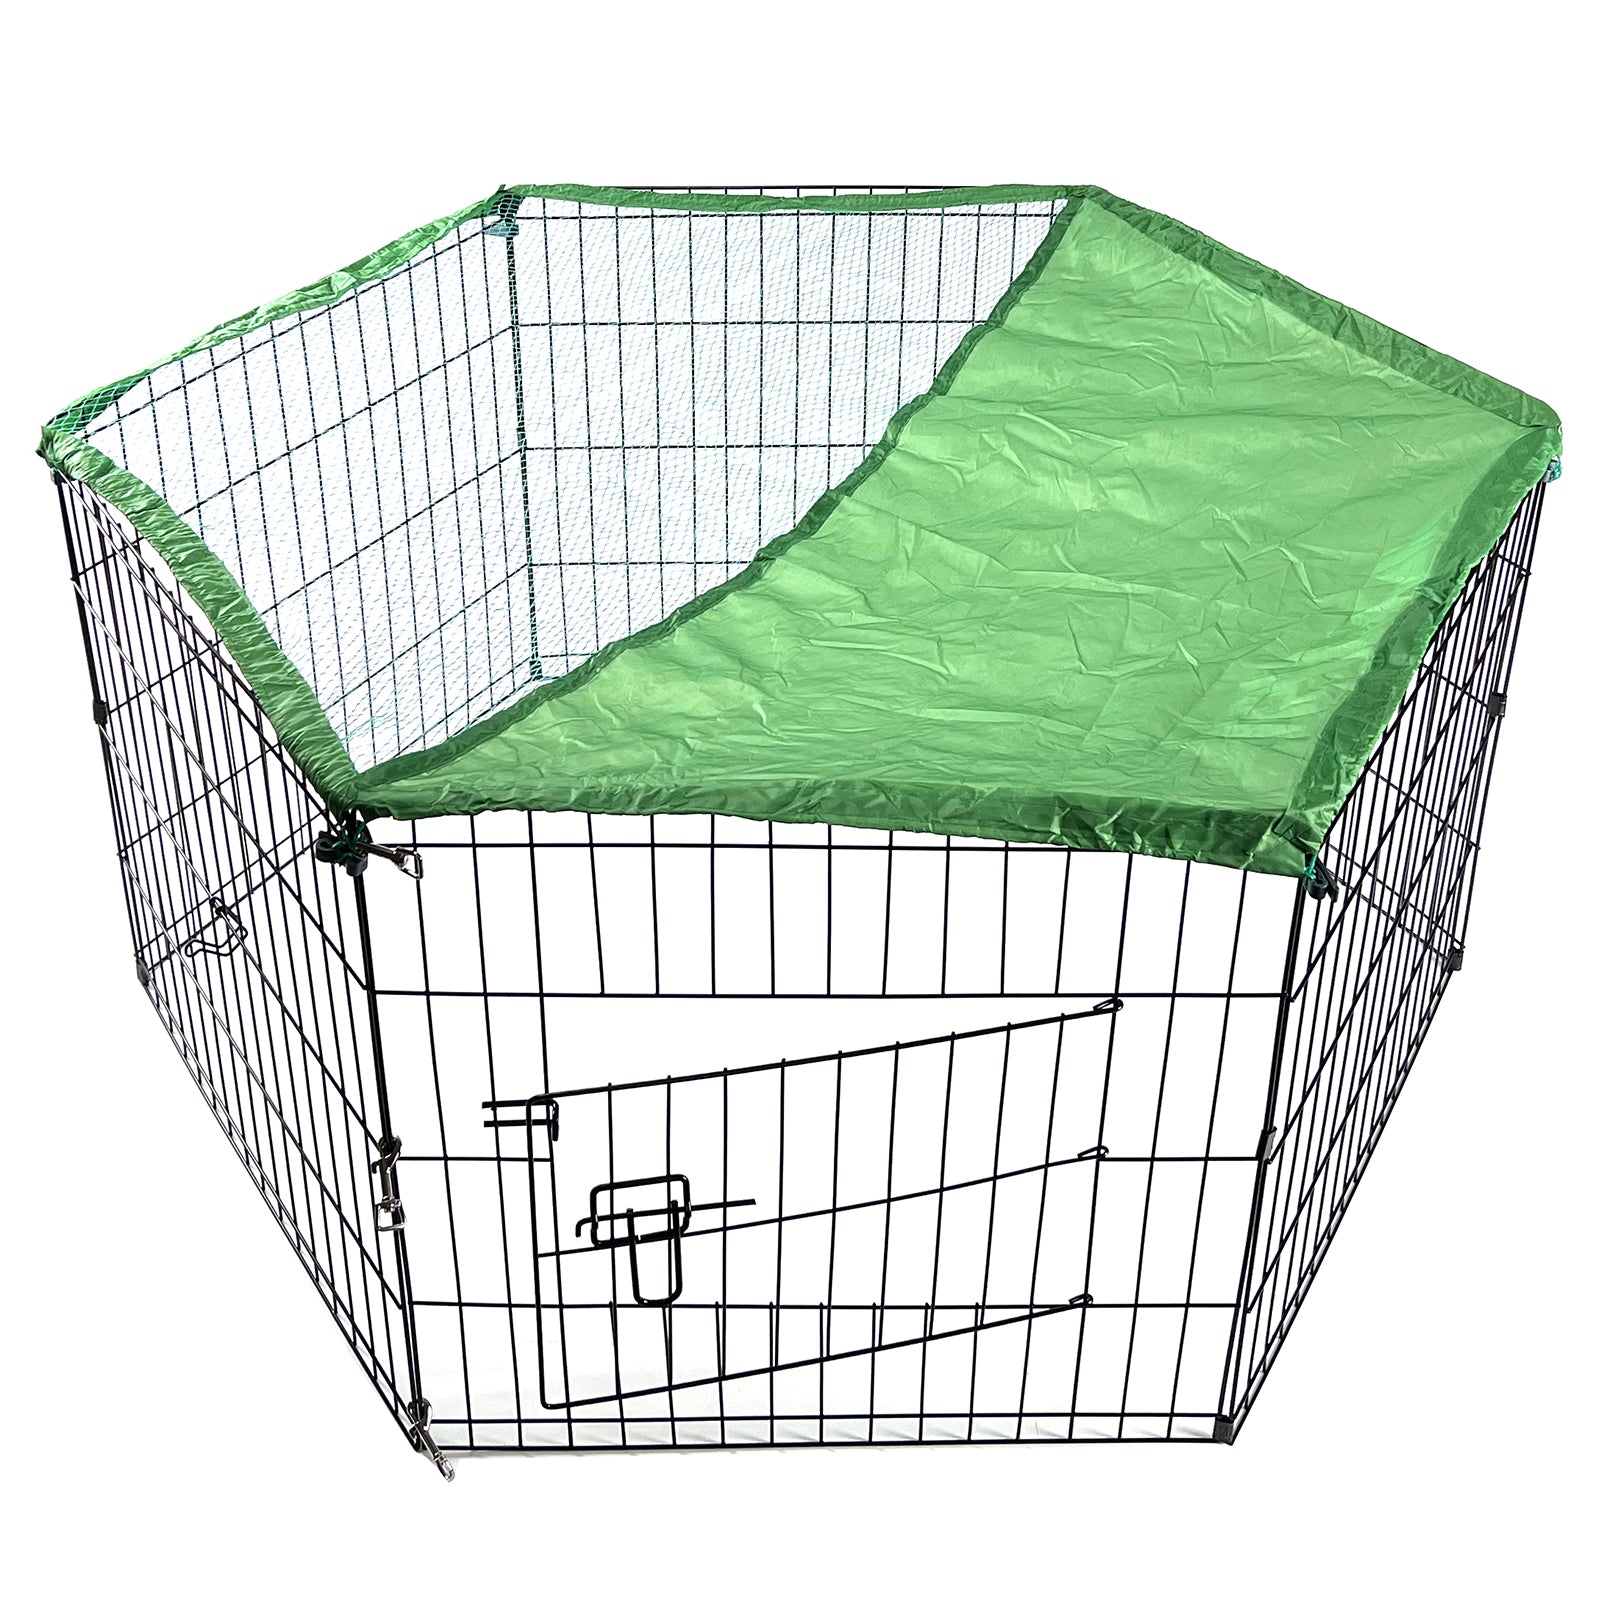 6 Panel Dog Cat Exercise Playpen Puppy Enclosure Rabbit Fence With Cover